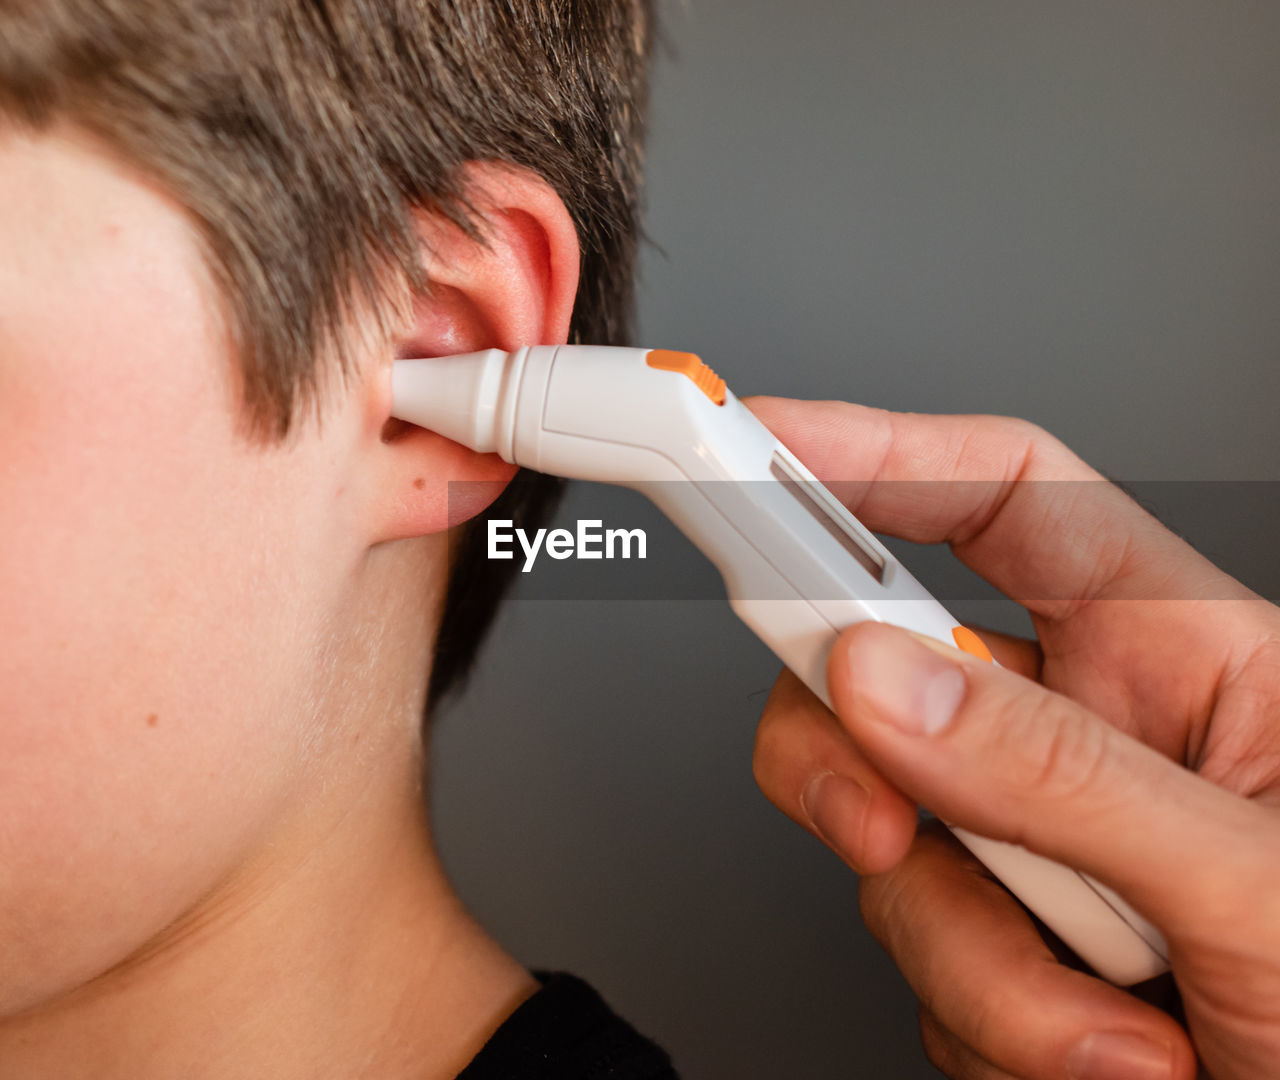 Close up of child getting temperature taken with an ear thermometer.